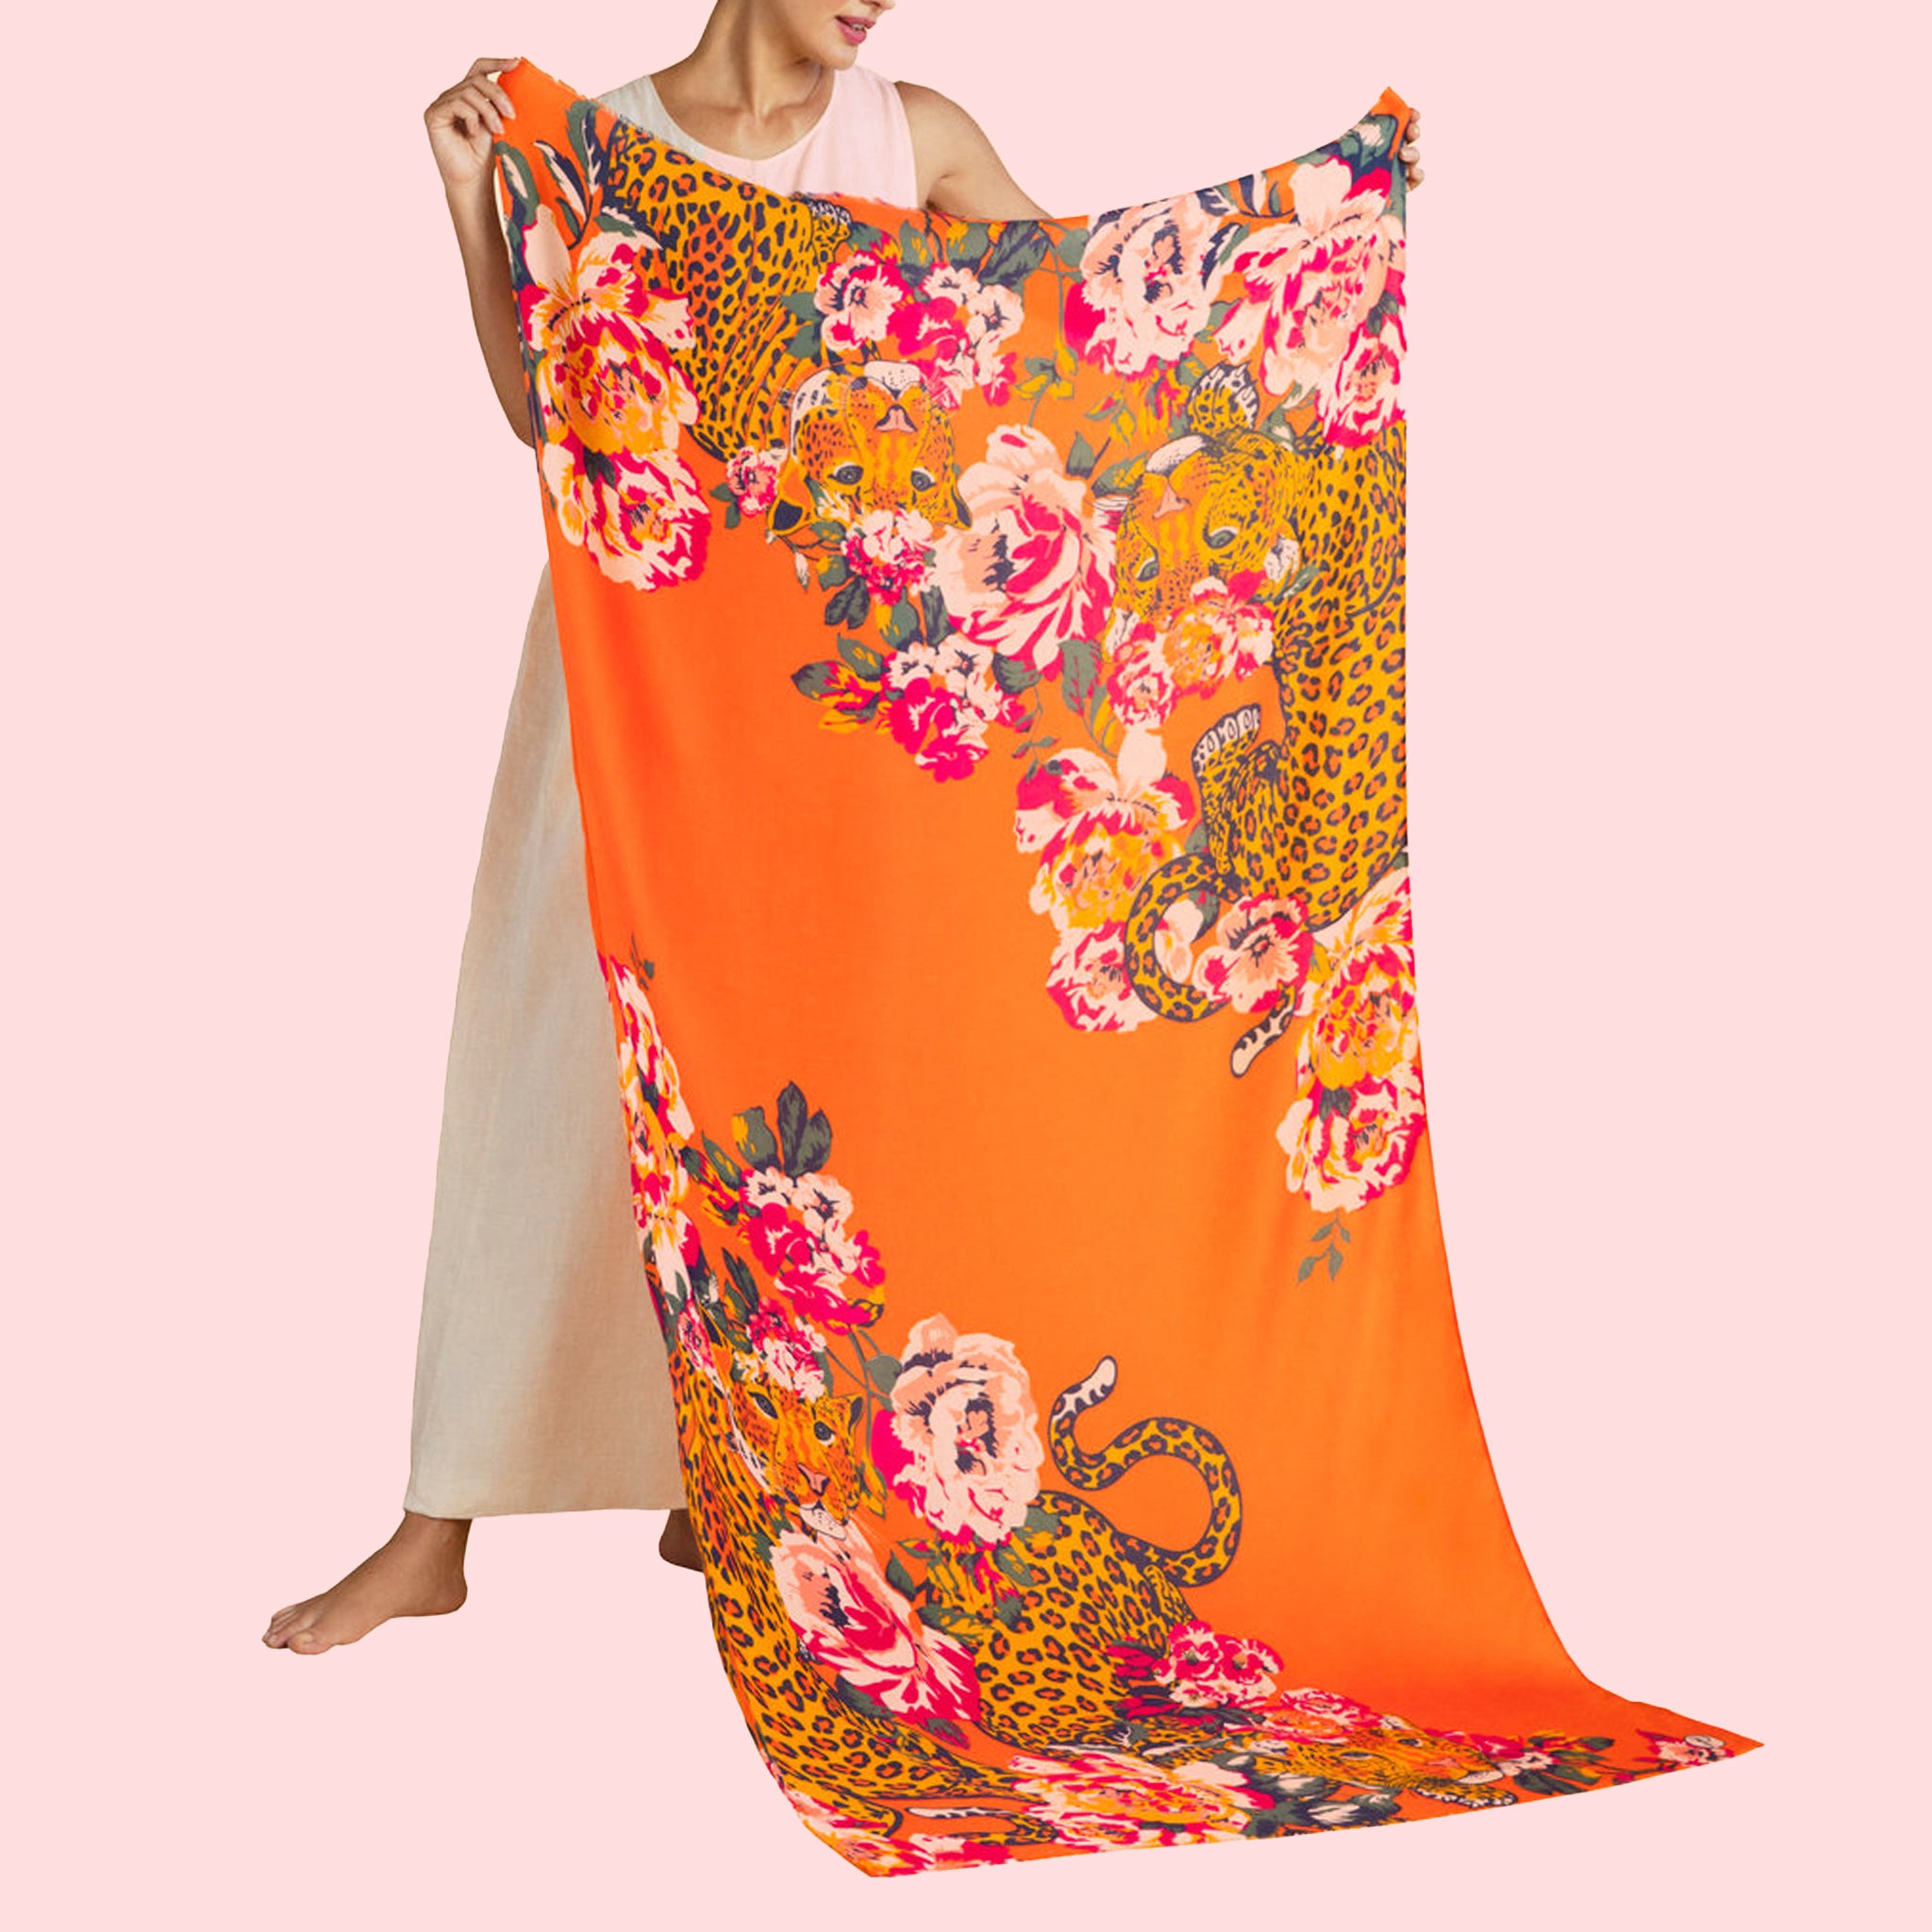 On a pink background is an orange scarf with a leopard and floral design. 